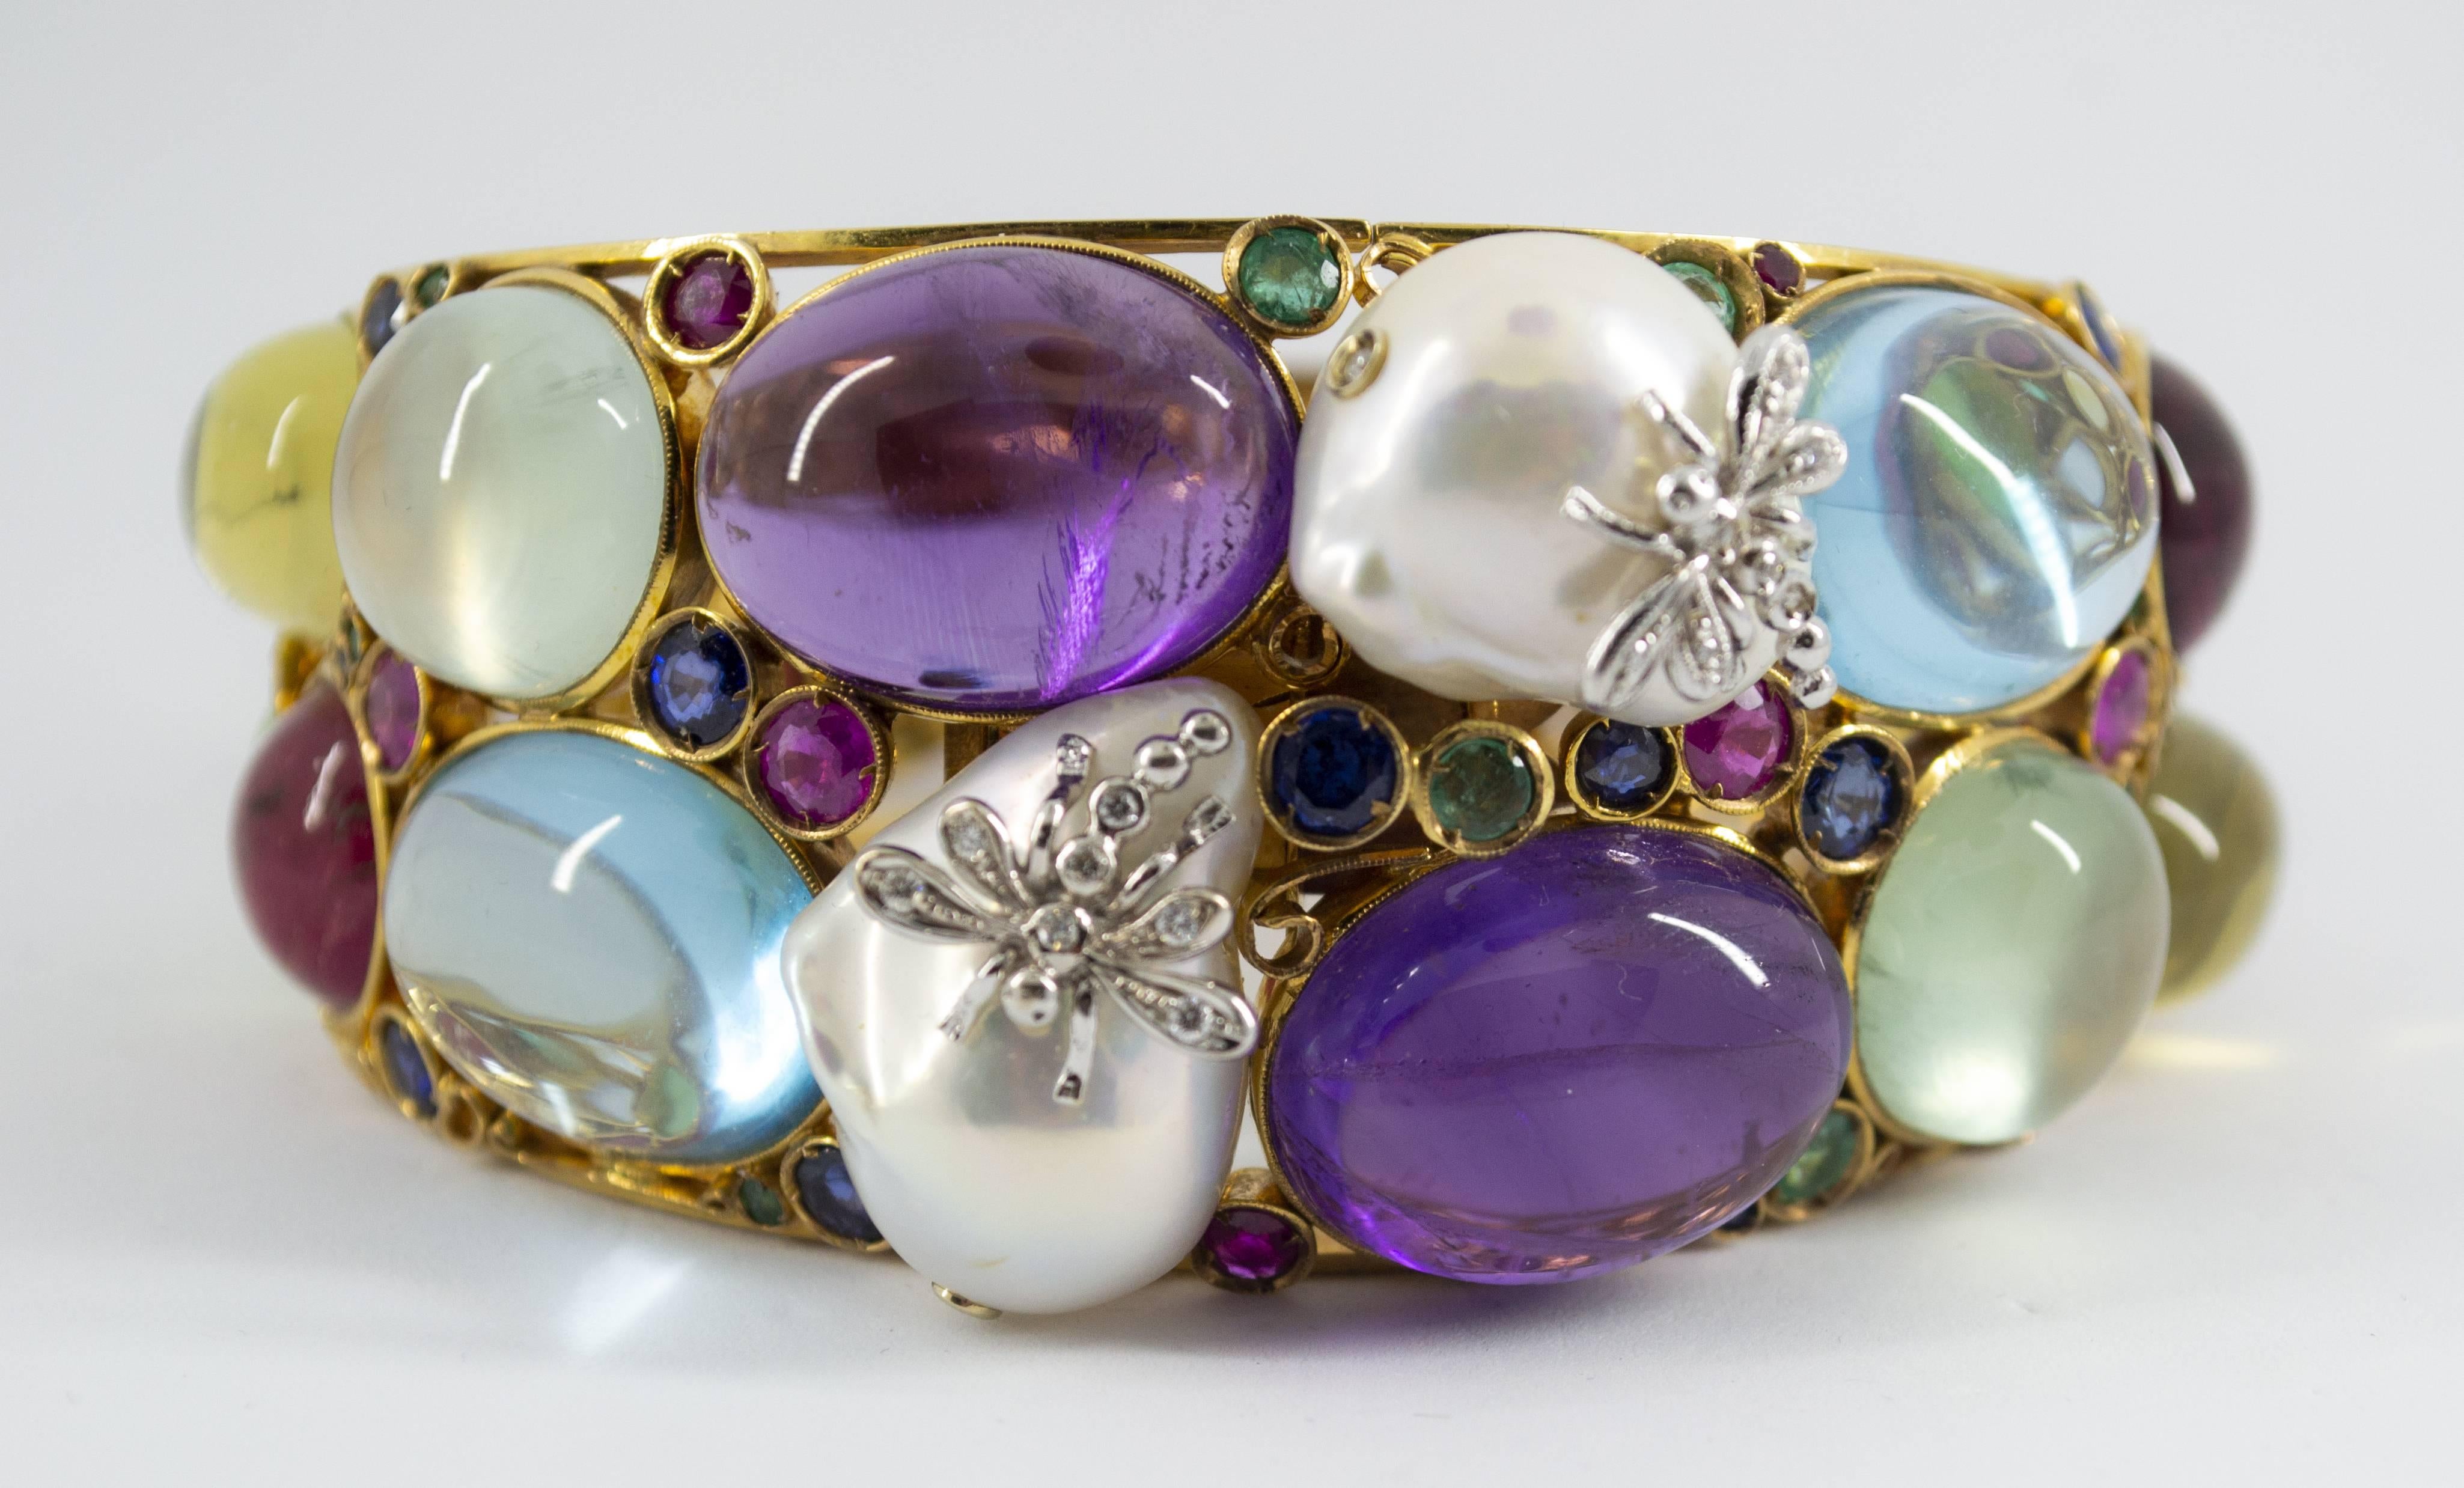 This Bracelet is made of 9K Yellow and White Gold.
This Bracelet has 0.15 of White Brilliant Cut Diamonds.
This Bracelet has 6.30 Carats of Emeralds, Rubies and Sapphires.
This Bracelet has also Amethyst, Citrine, Topaz, Tourmaline, Pearl.

We're a